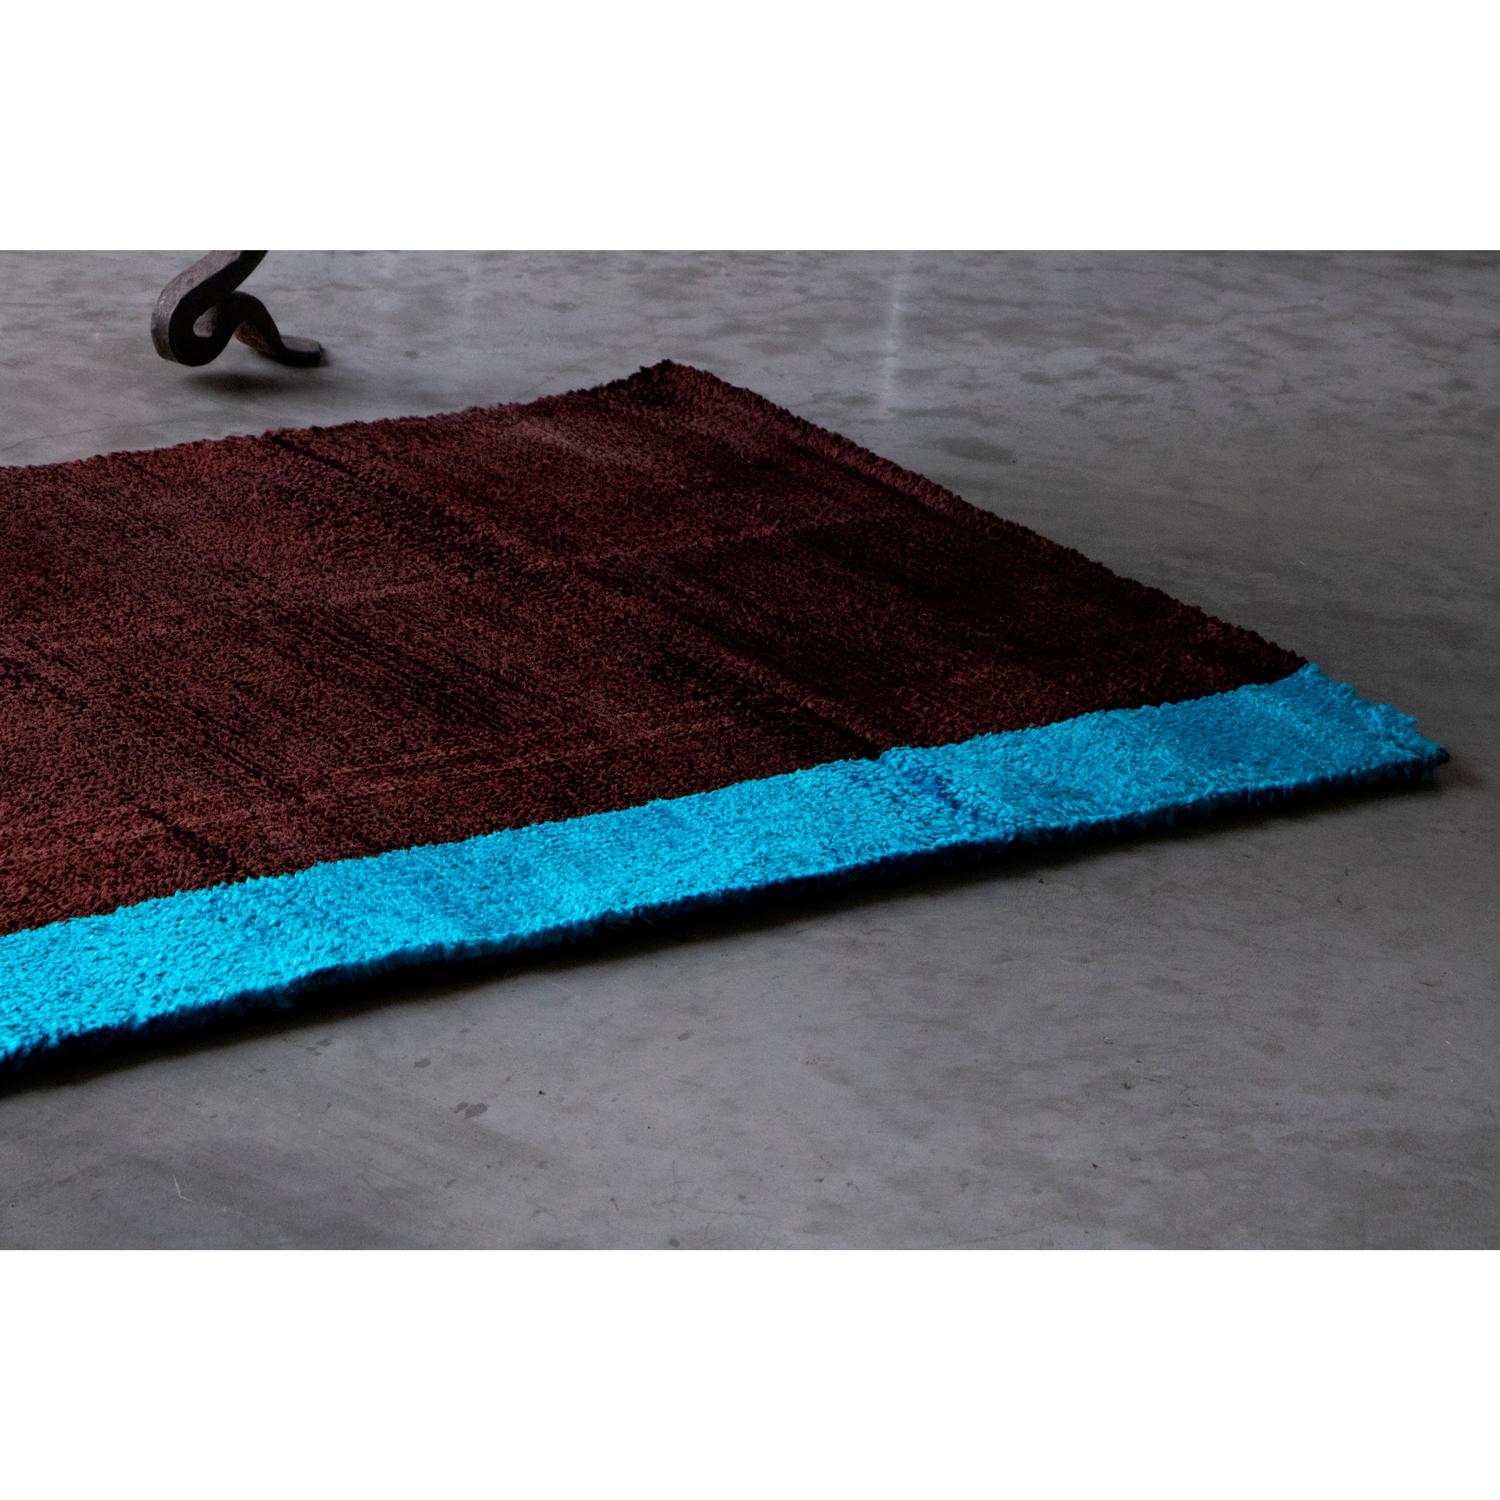 Indian 21st Cent Shiny Sky Blue Brown Runner Rug by Deanna Comellini in Stock 70x240 cm For Sale